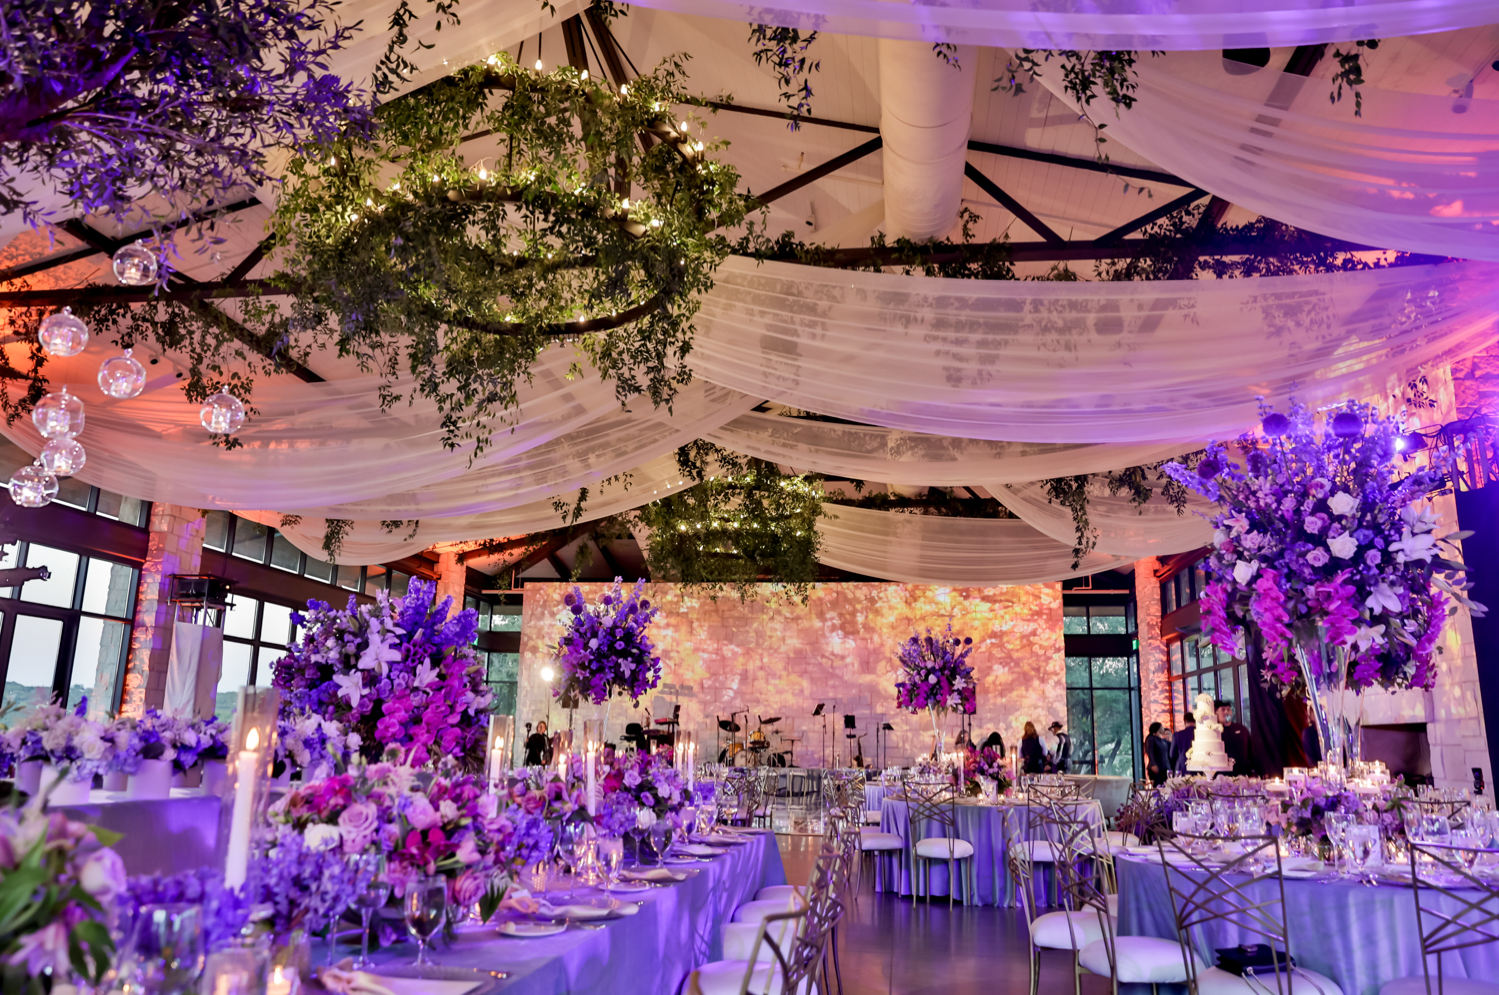 A shot of the reception details in the blue mood lighting. Greenery hanging from the chandeliers, sheets of tulle draped across the ceiling, large flower arrangements, sparkling dinnerware, and blue table linens decorate the room.